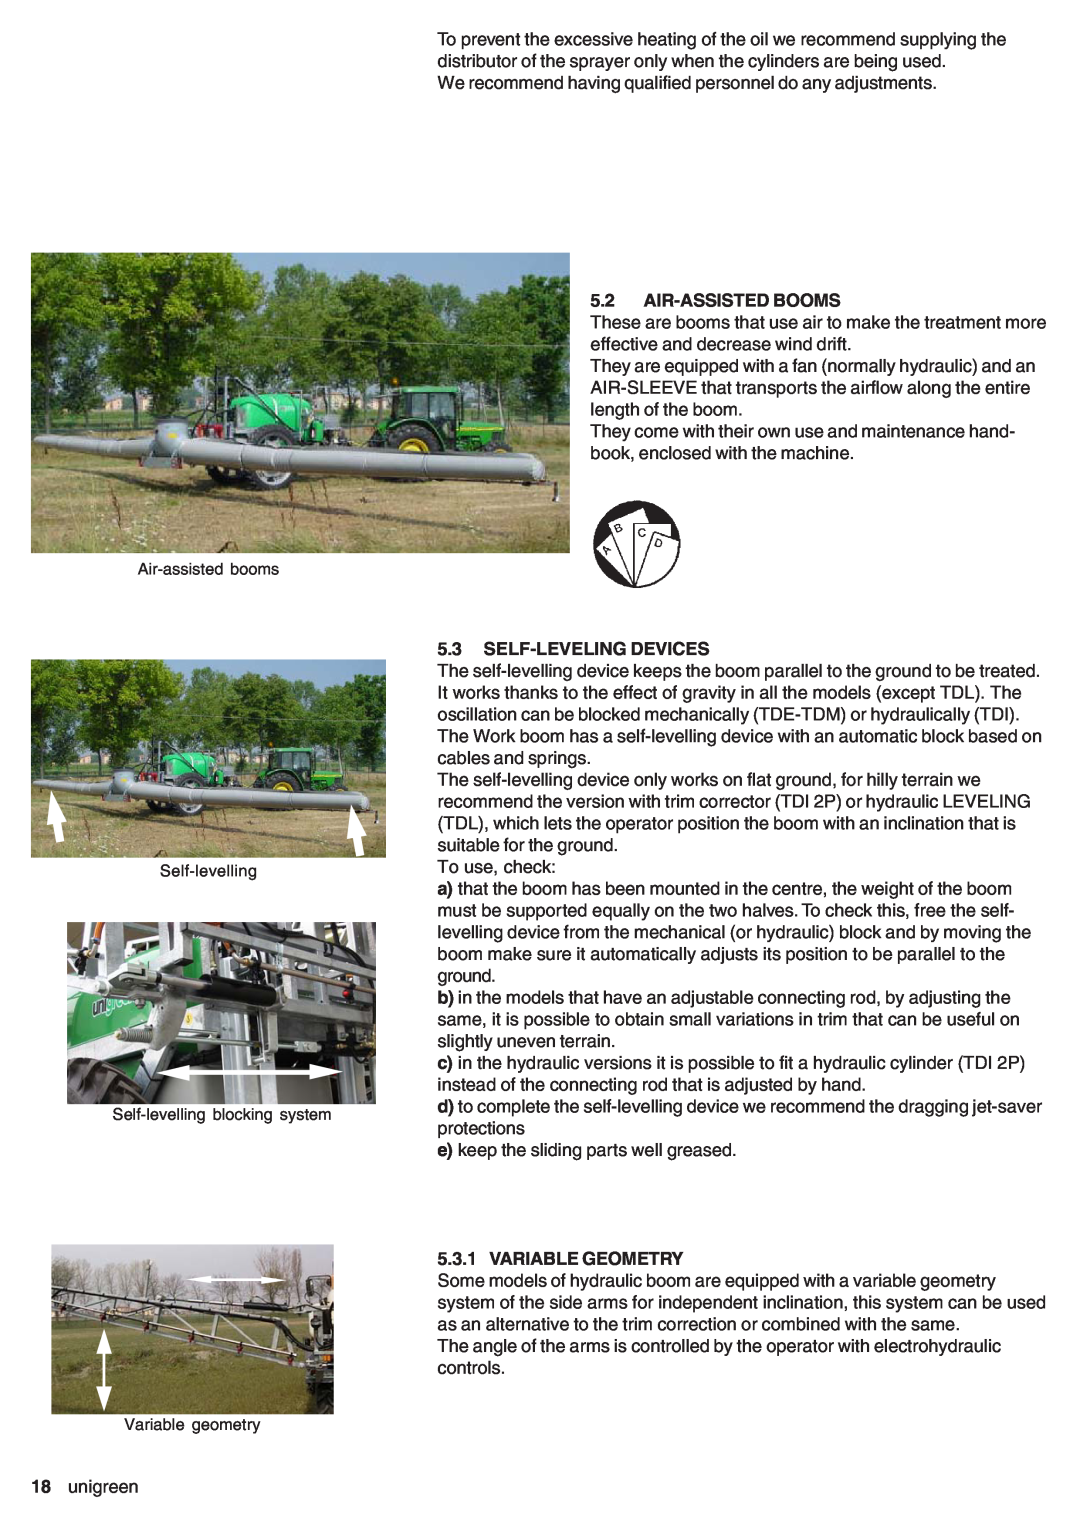 Unigreen DSP 11 - 16 - 22 - 32, CAMPO 11 - 16 - 22 - 32 manual Air-Assisted Booms, Self-Leveling Devices, Variable Geometry 